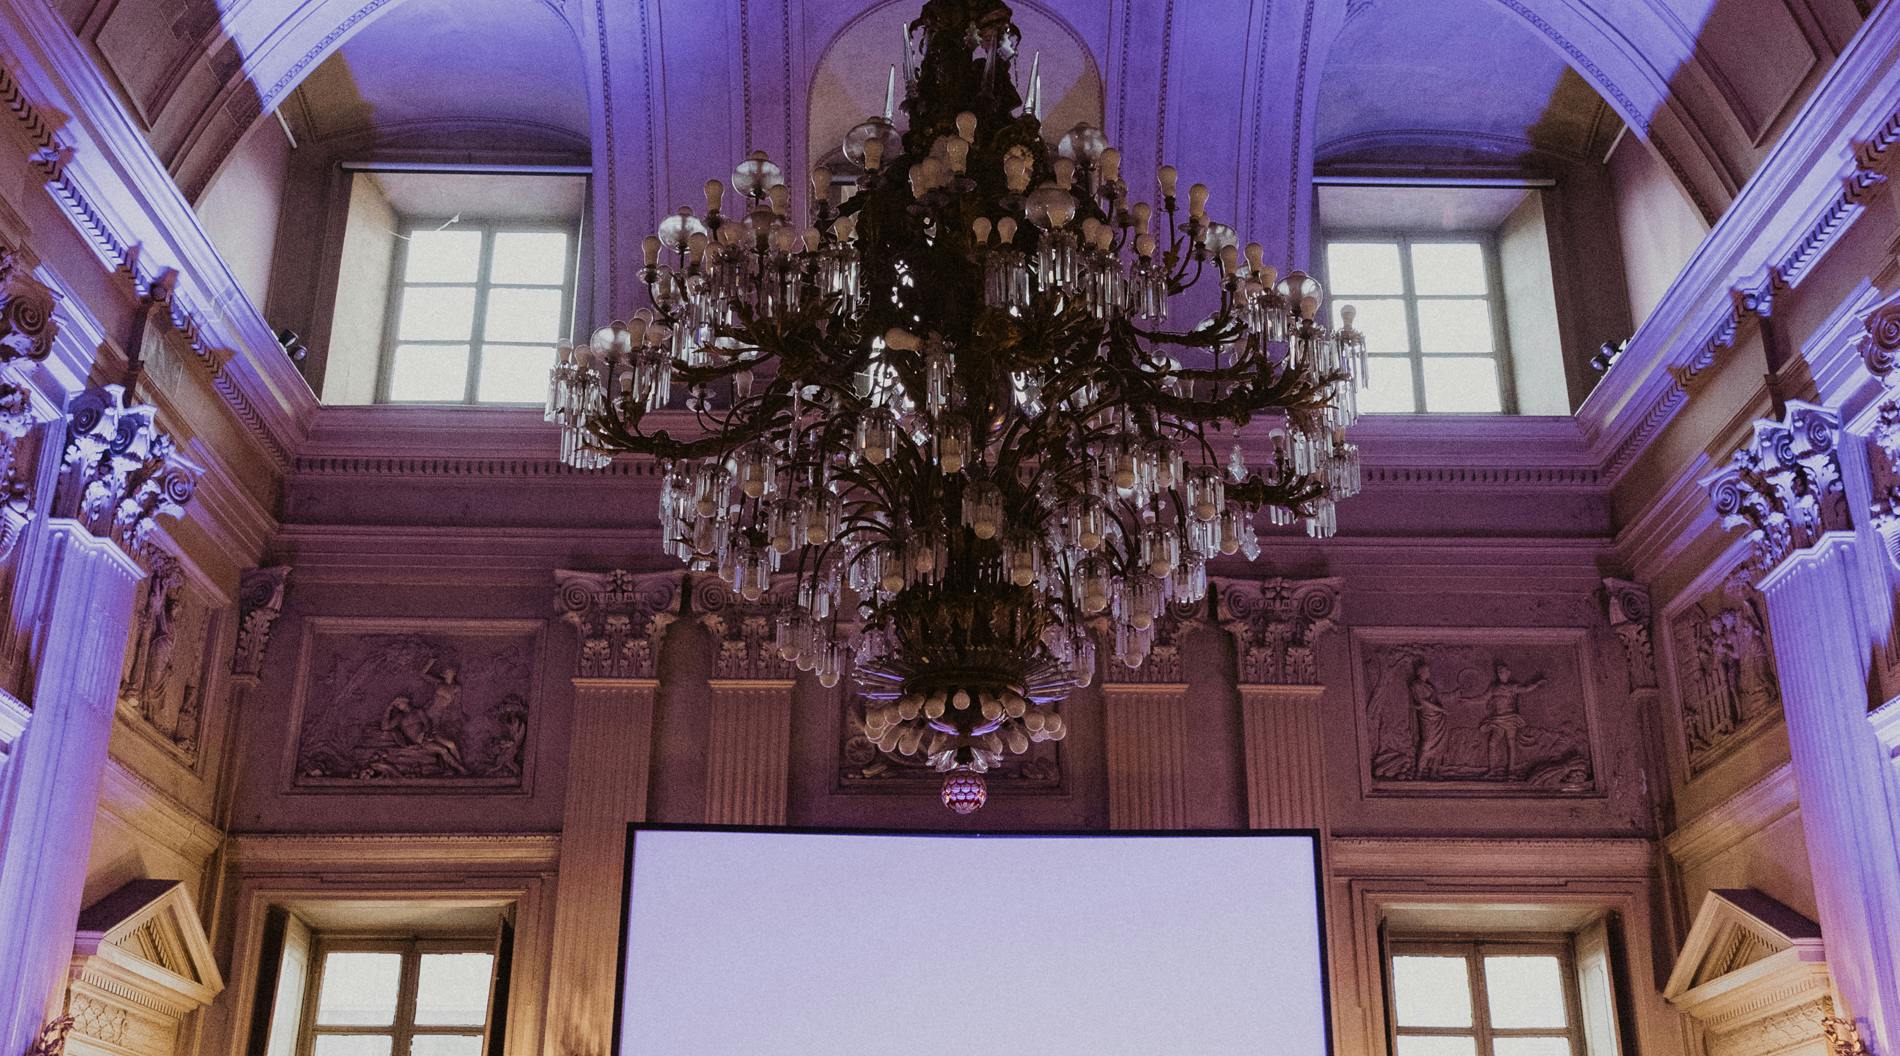 Big room with chairs, screen and chandelier